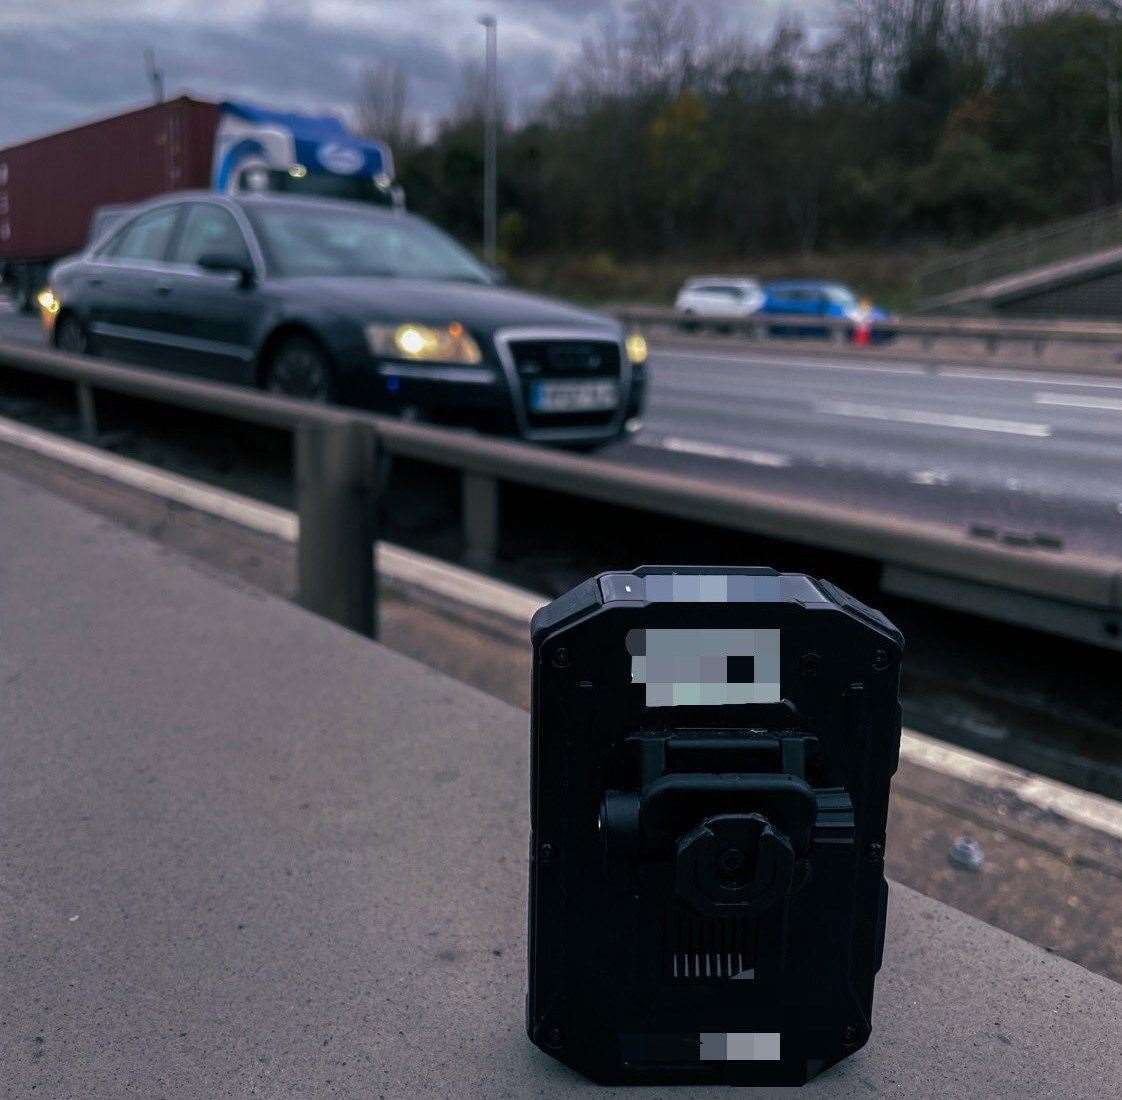 Police set up a body worn camera after a crash near the Dartford Crossing after spotting drivers using a mobile phone behind the wheel filming the incident. Picture: Kent Police